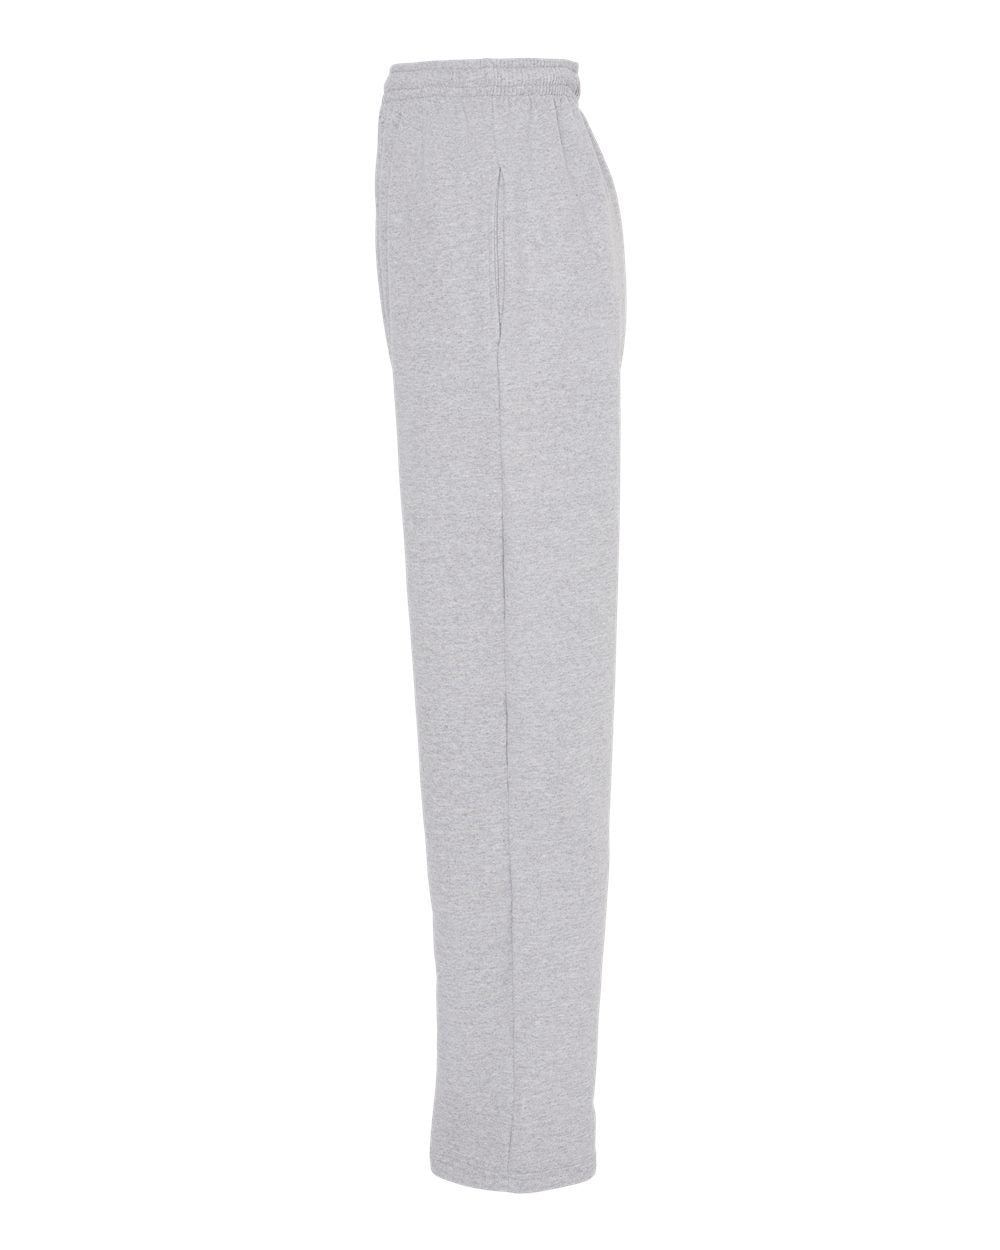 King Fashion Pocketed Open Bottom Sweatpants KF9022 #color_Athletic Grey